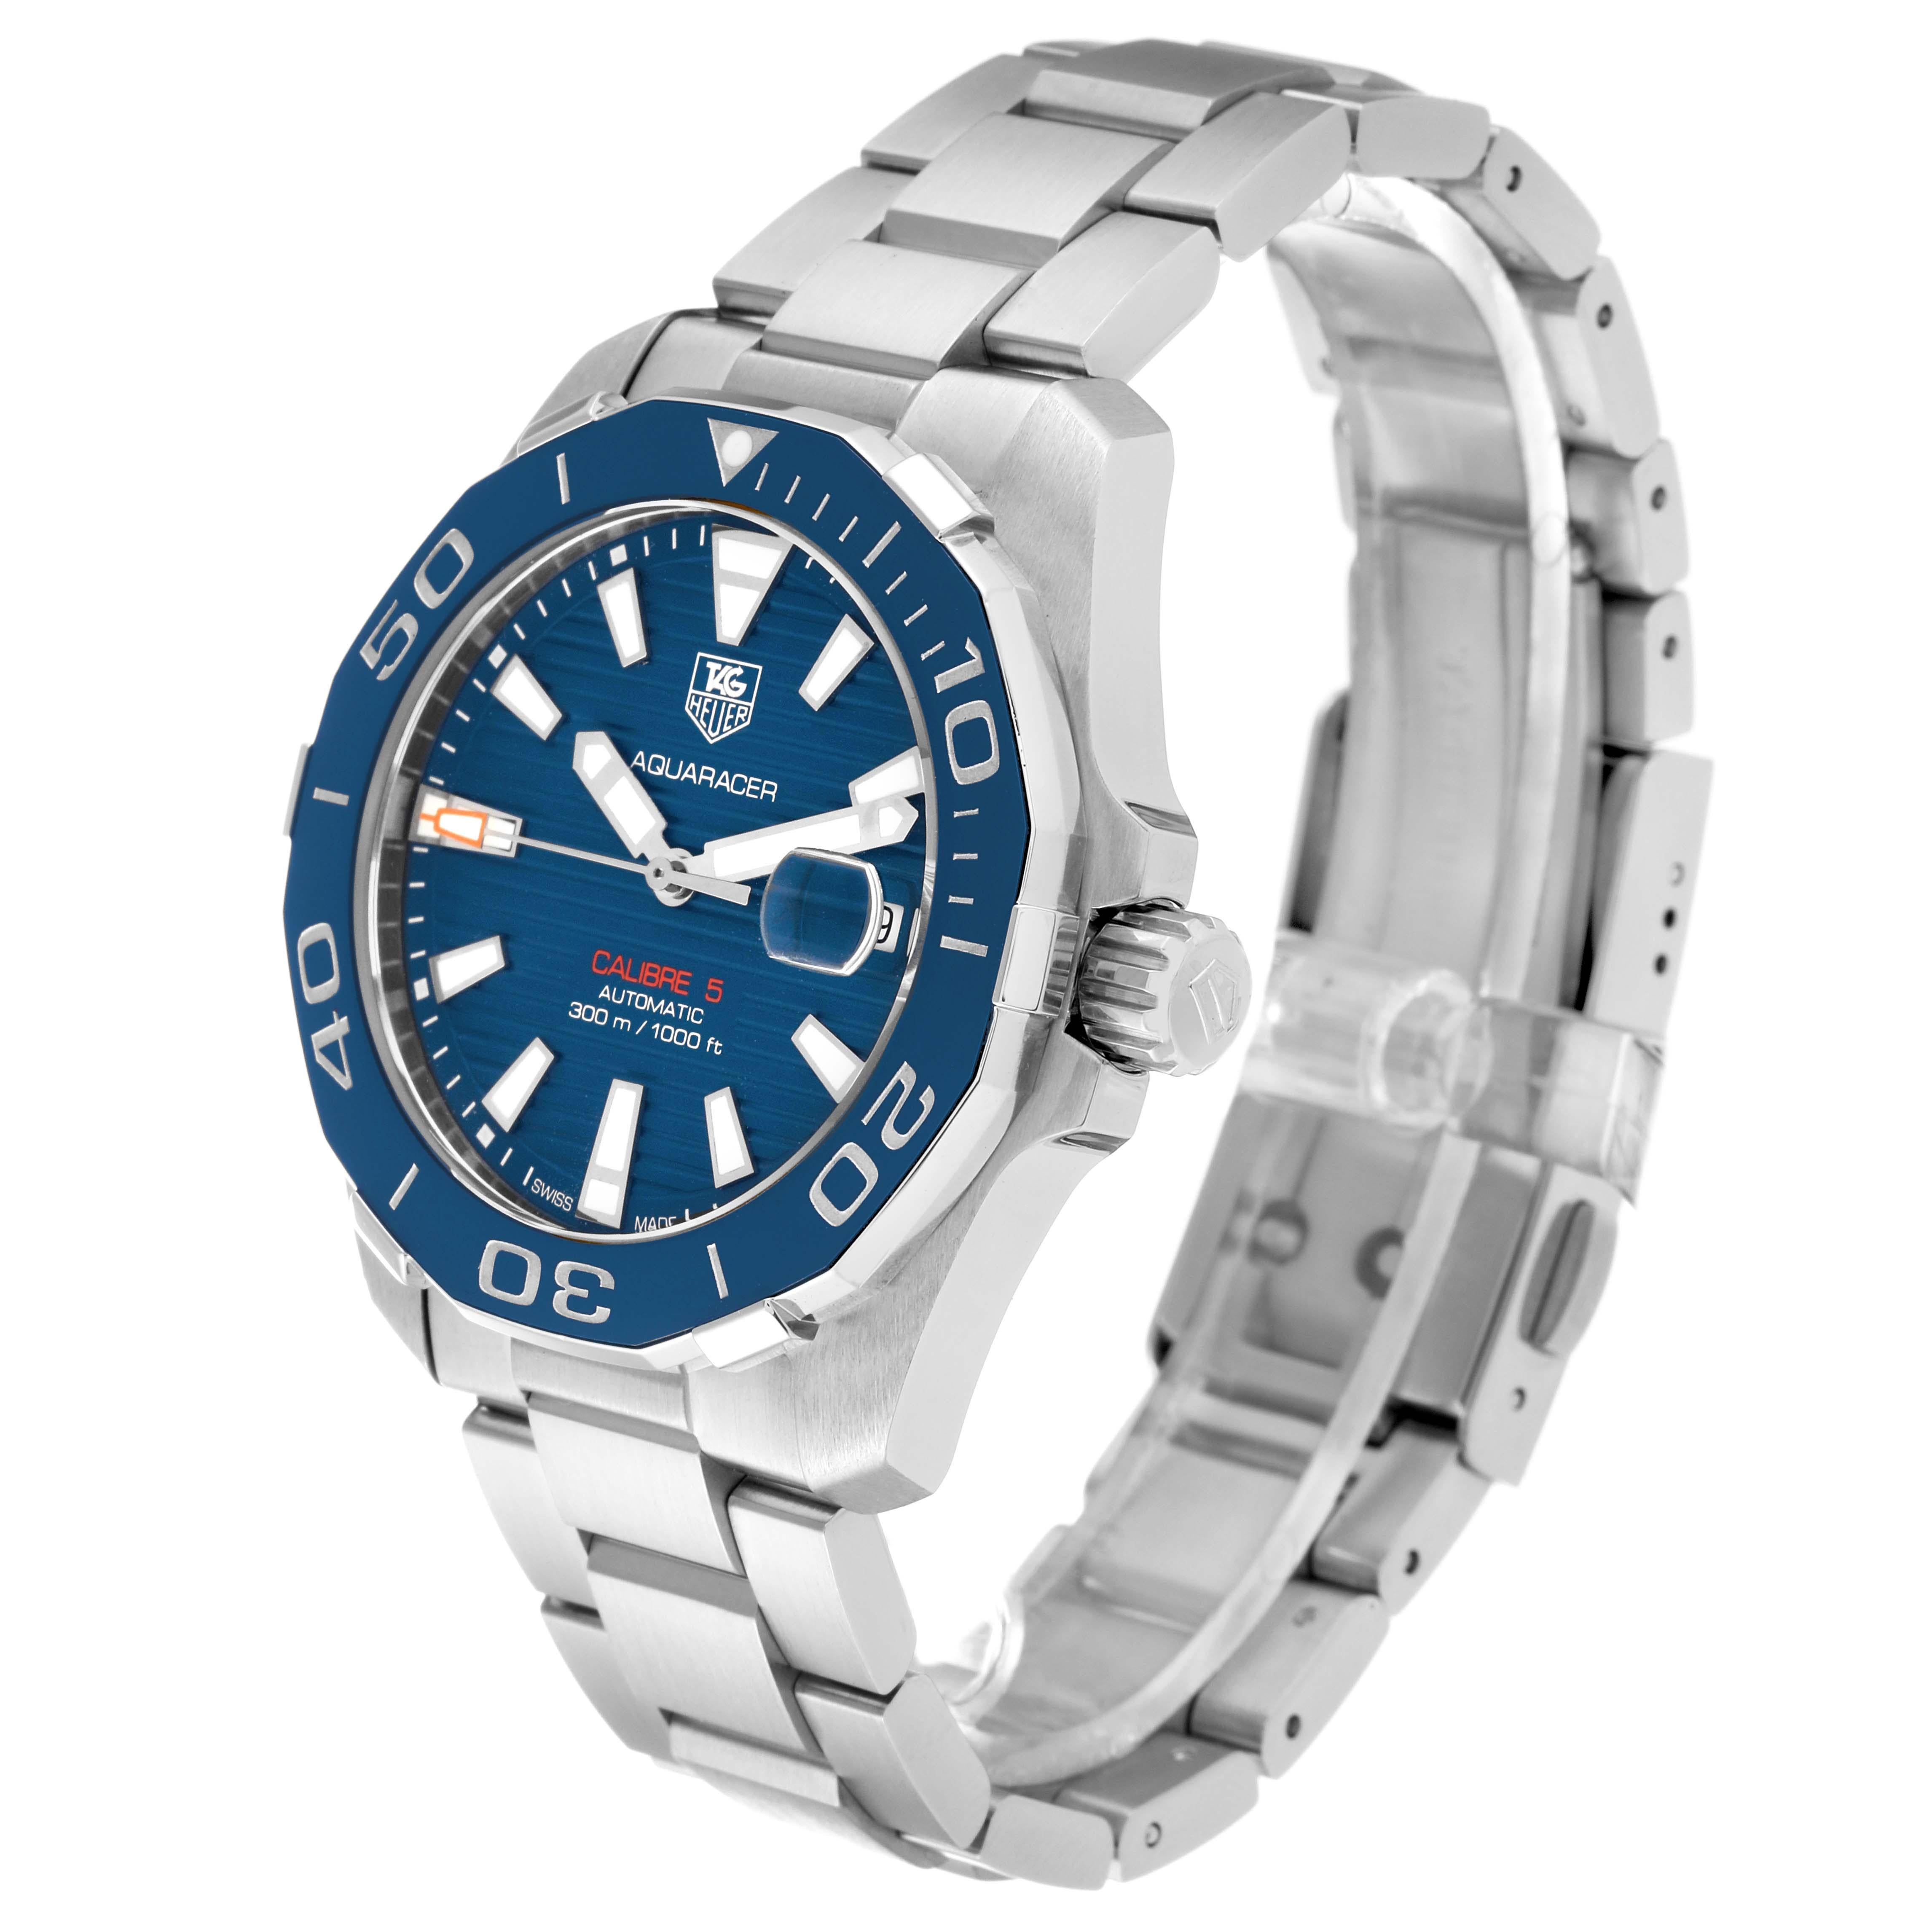 Tag Heuer Aquaracer Blue Dial Automatic Steel Mens Watch WAY211C. Automatic self-winding movement. Stainless steel case 41.0 mm in diameter. Blue unidirectional rotating bezel. Scratch resistant sapphire crystal. Blue dial with luminous hands and